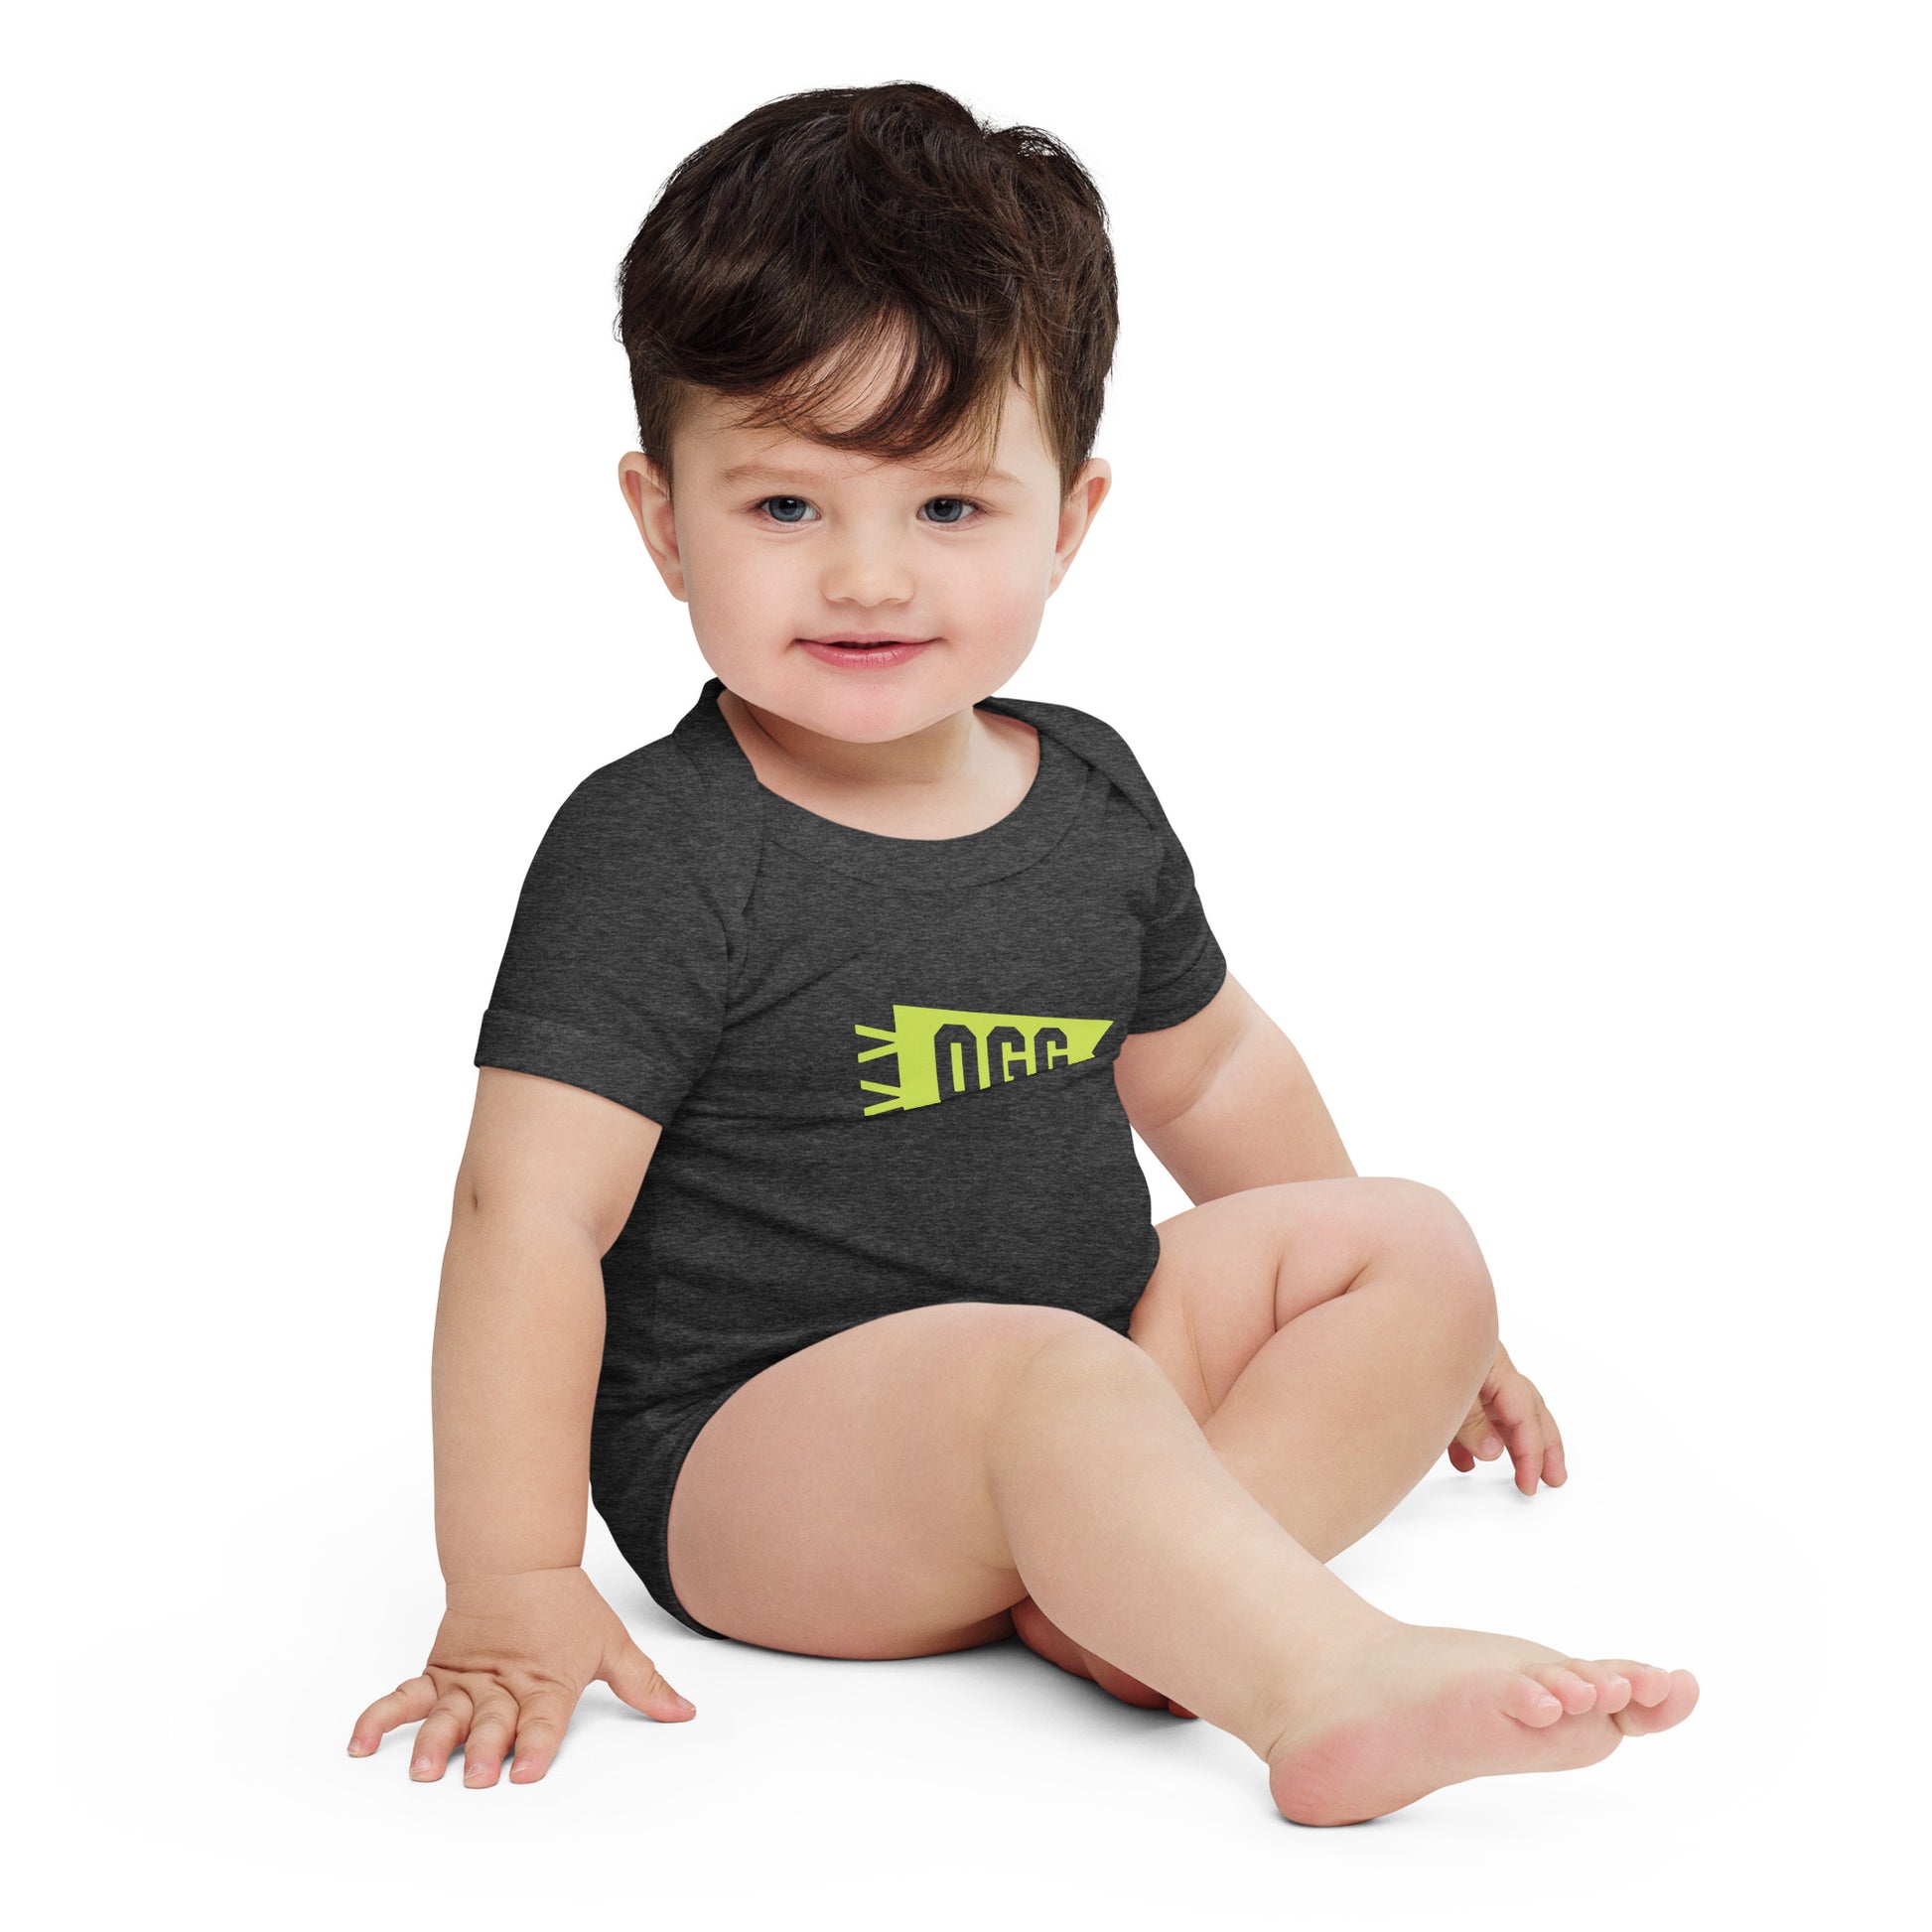 Airport Code Baby Bodysuit - Green • OGG Maui • YHM Designs - Image 04